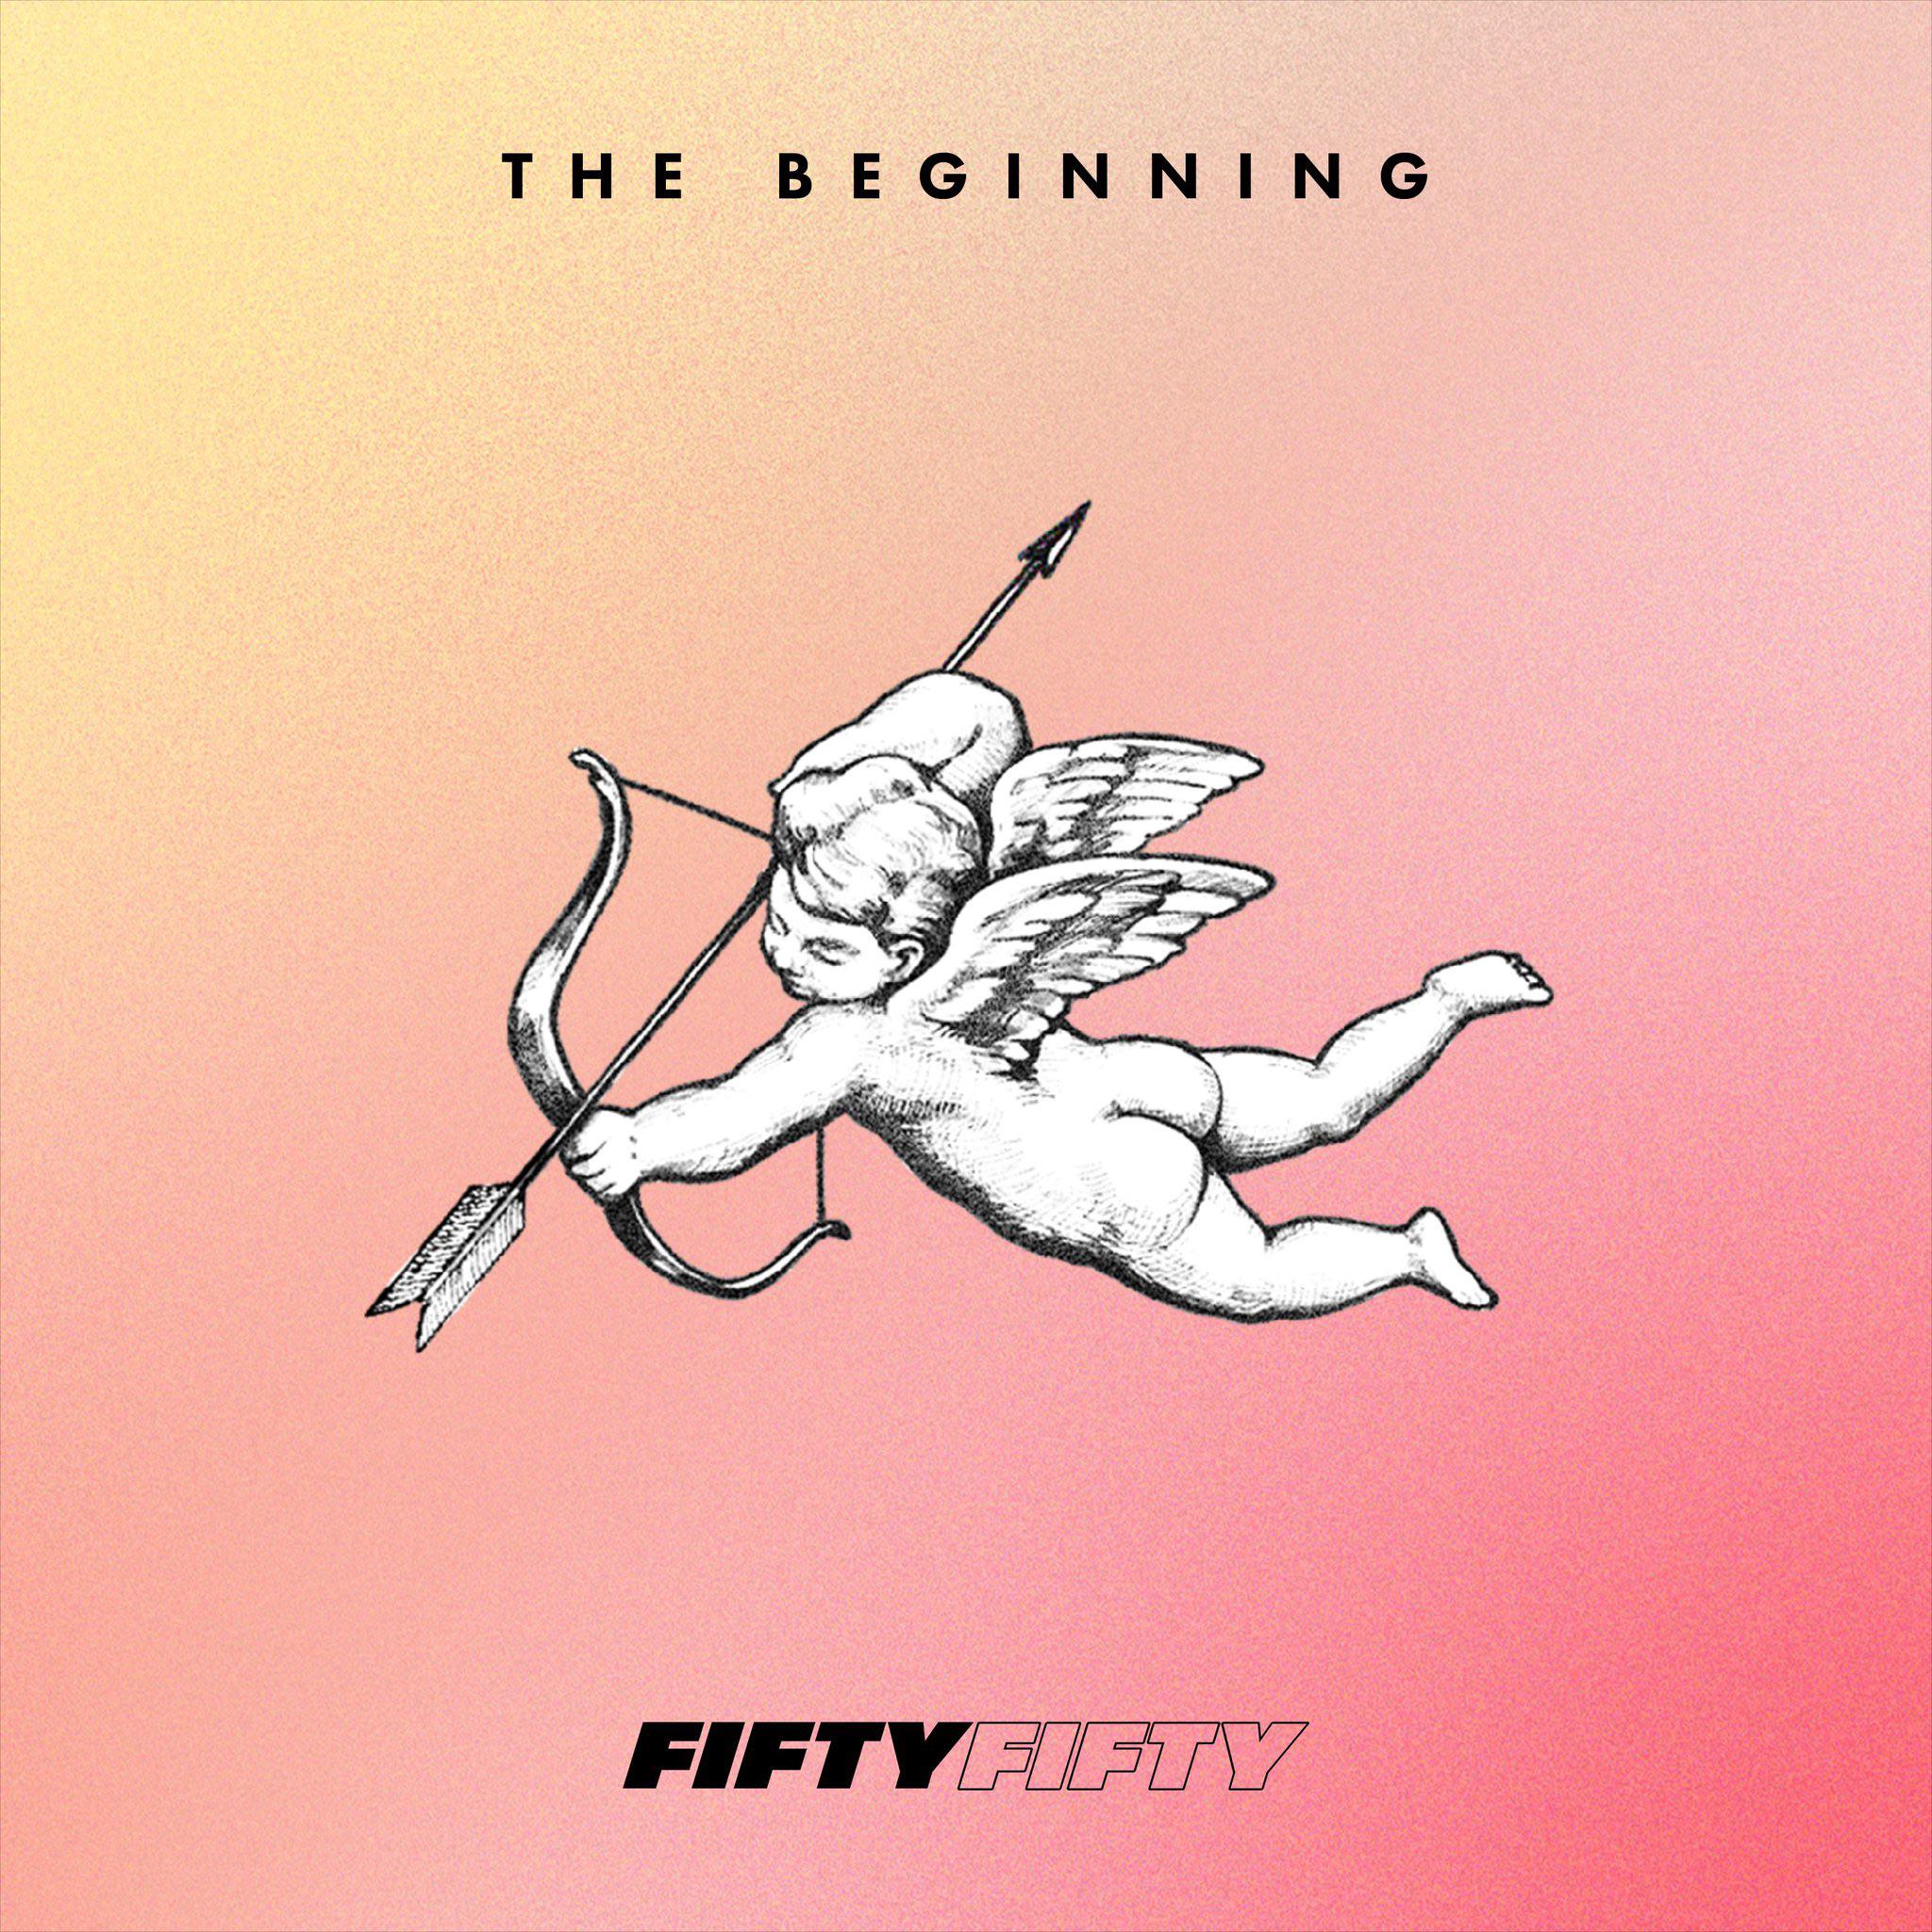 FIFTY FIFTY 1st Single Album “The Beginning: Cupid” (Cover Art Image)